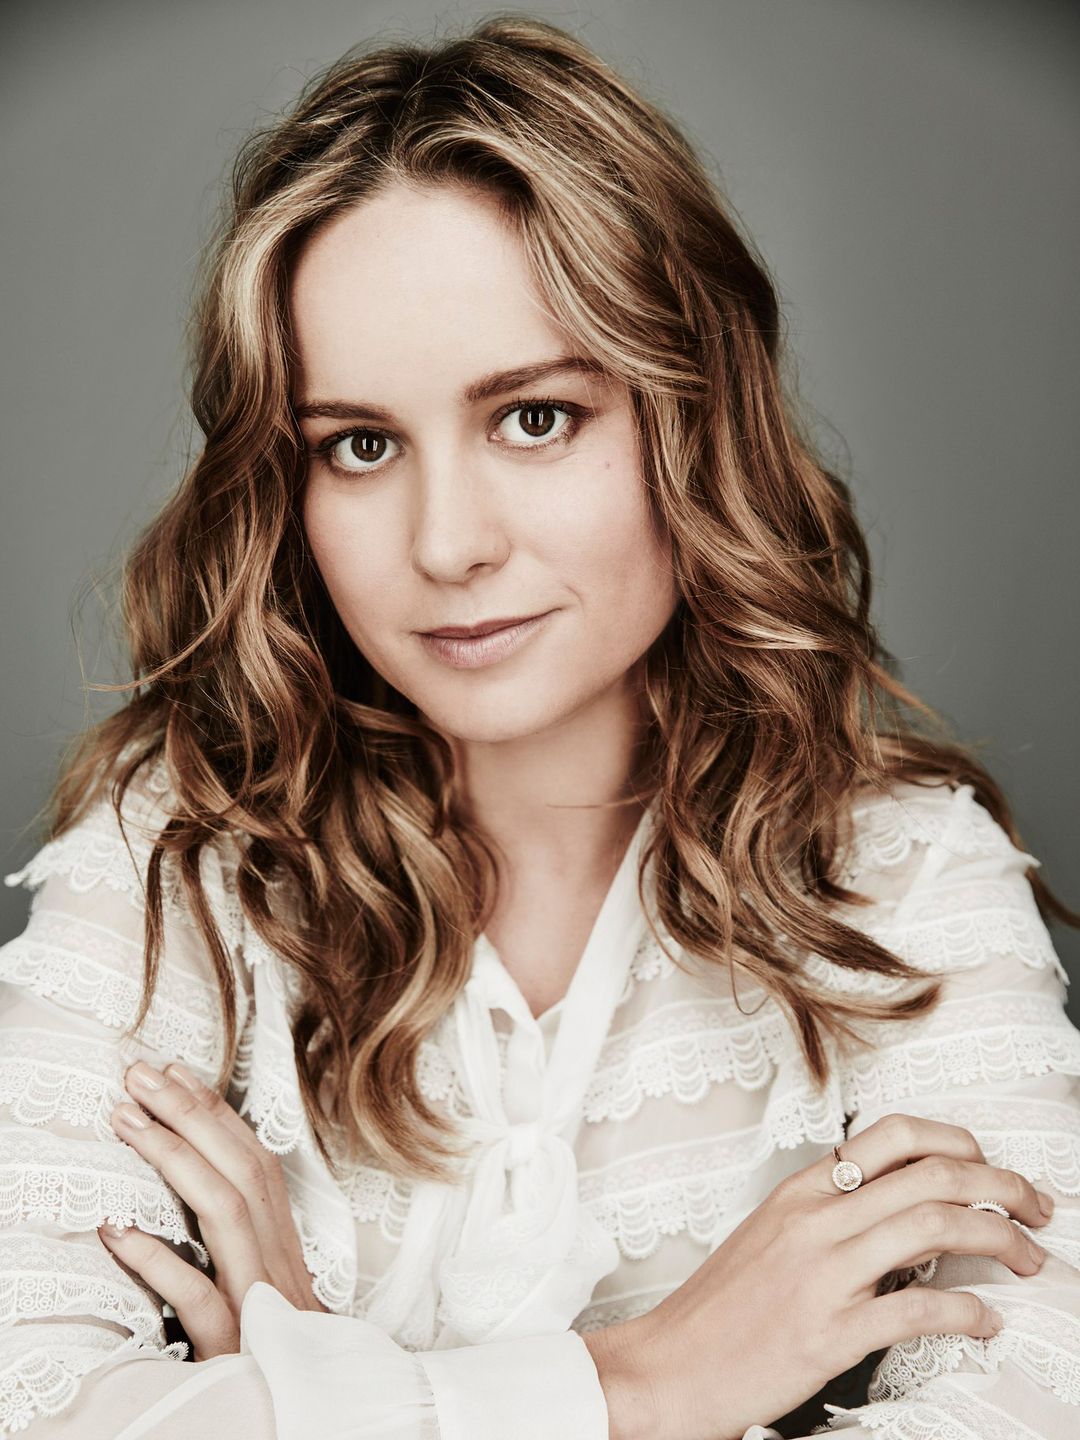 Brie Larson who is her mother